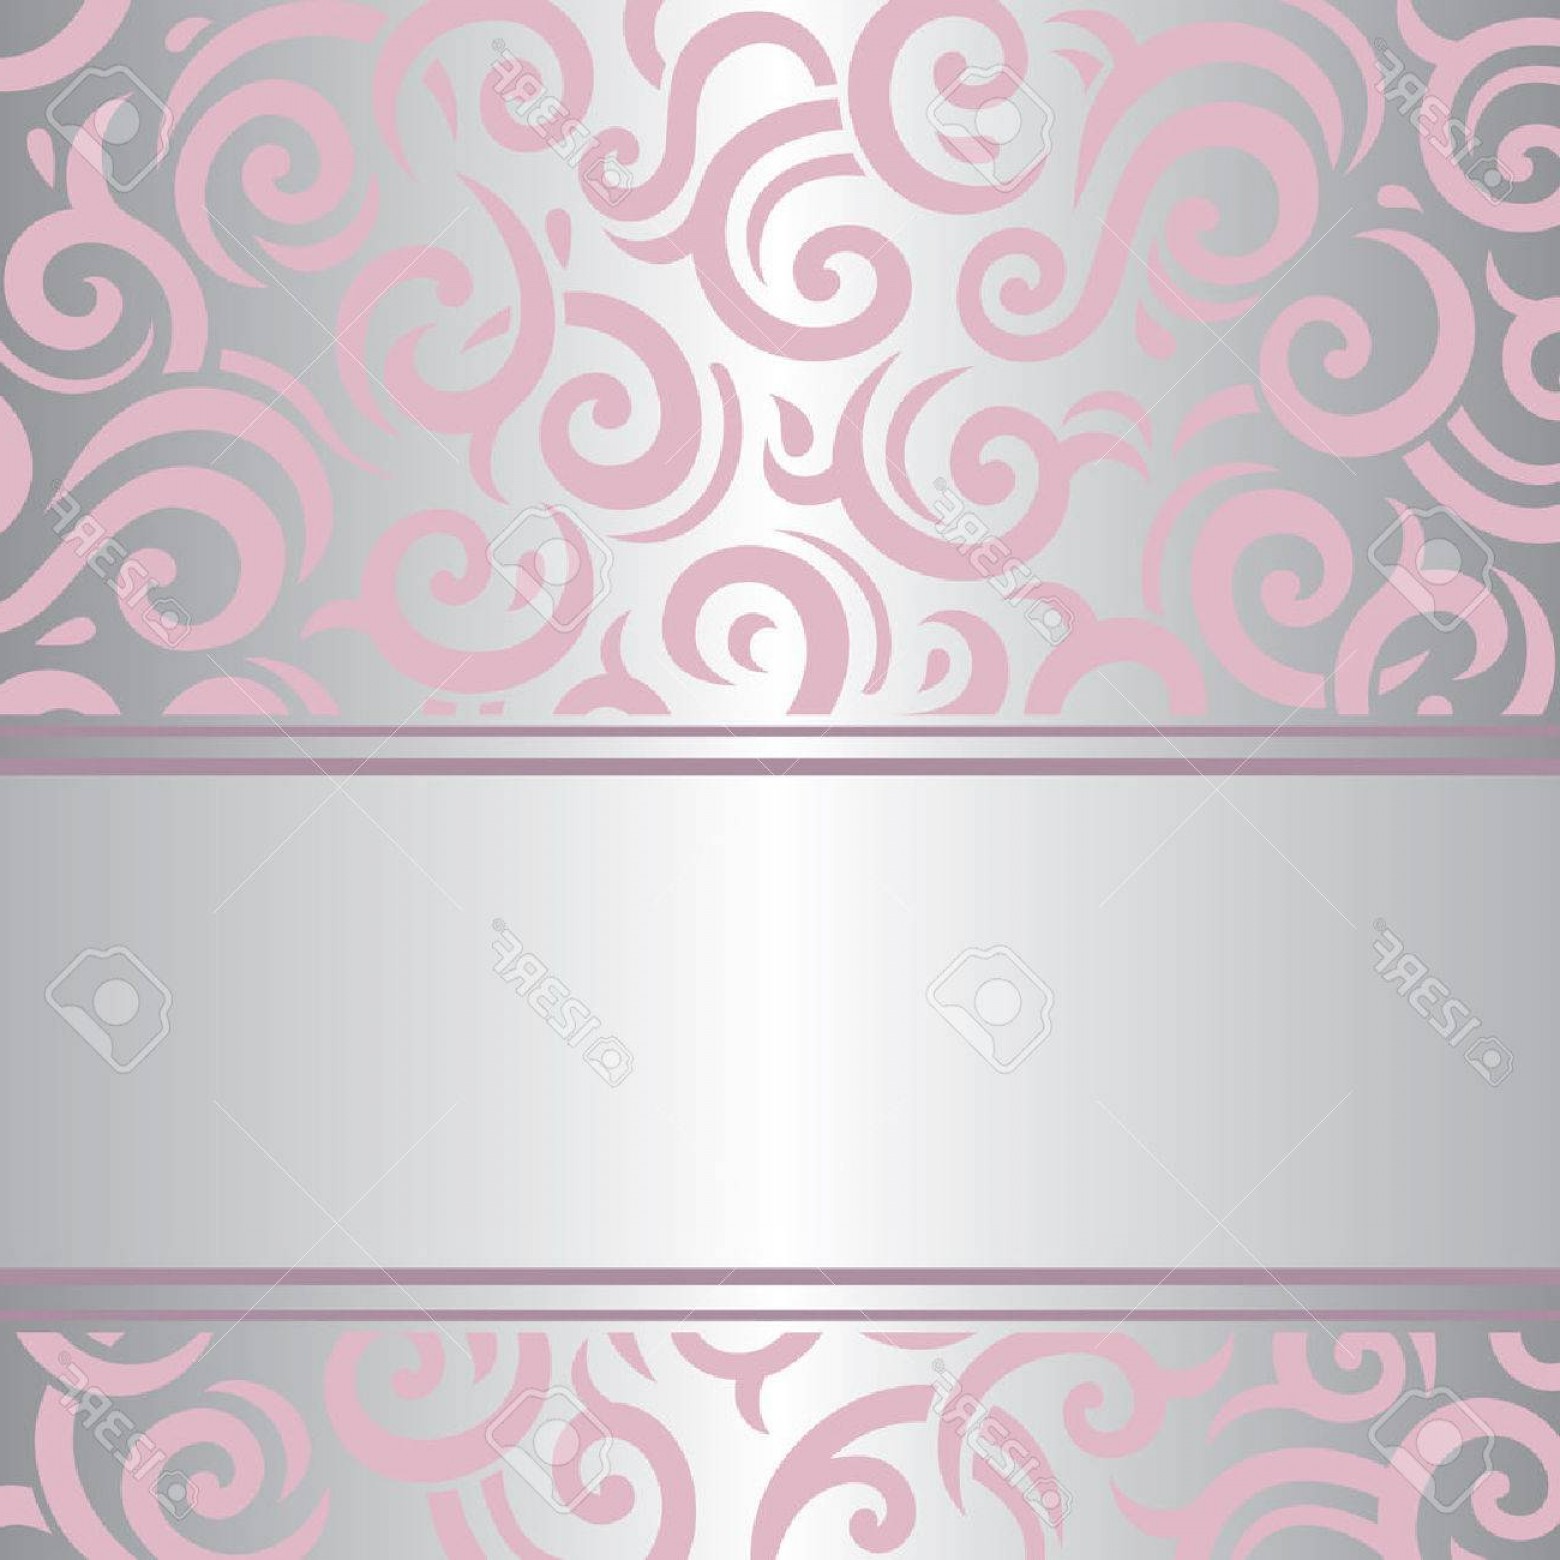 Neon Green Softball Stitches Vector - Pink And Silver Background -  1560x1560 Wallpaper 